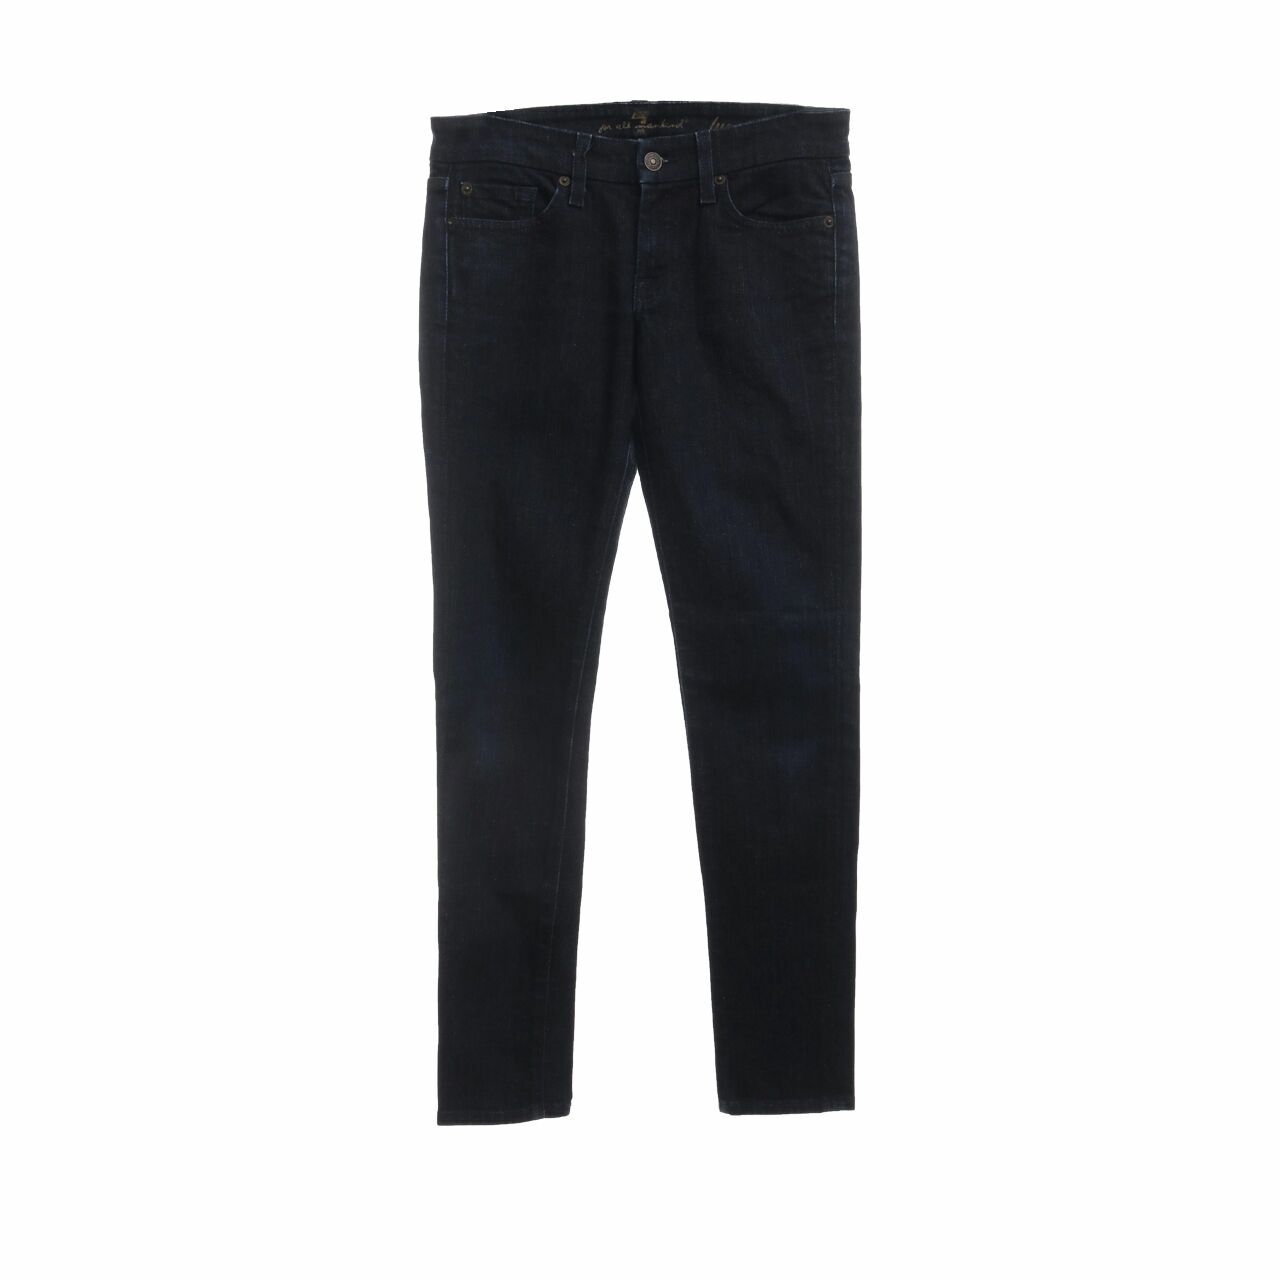 7 For All Mankind Navy Jeans